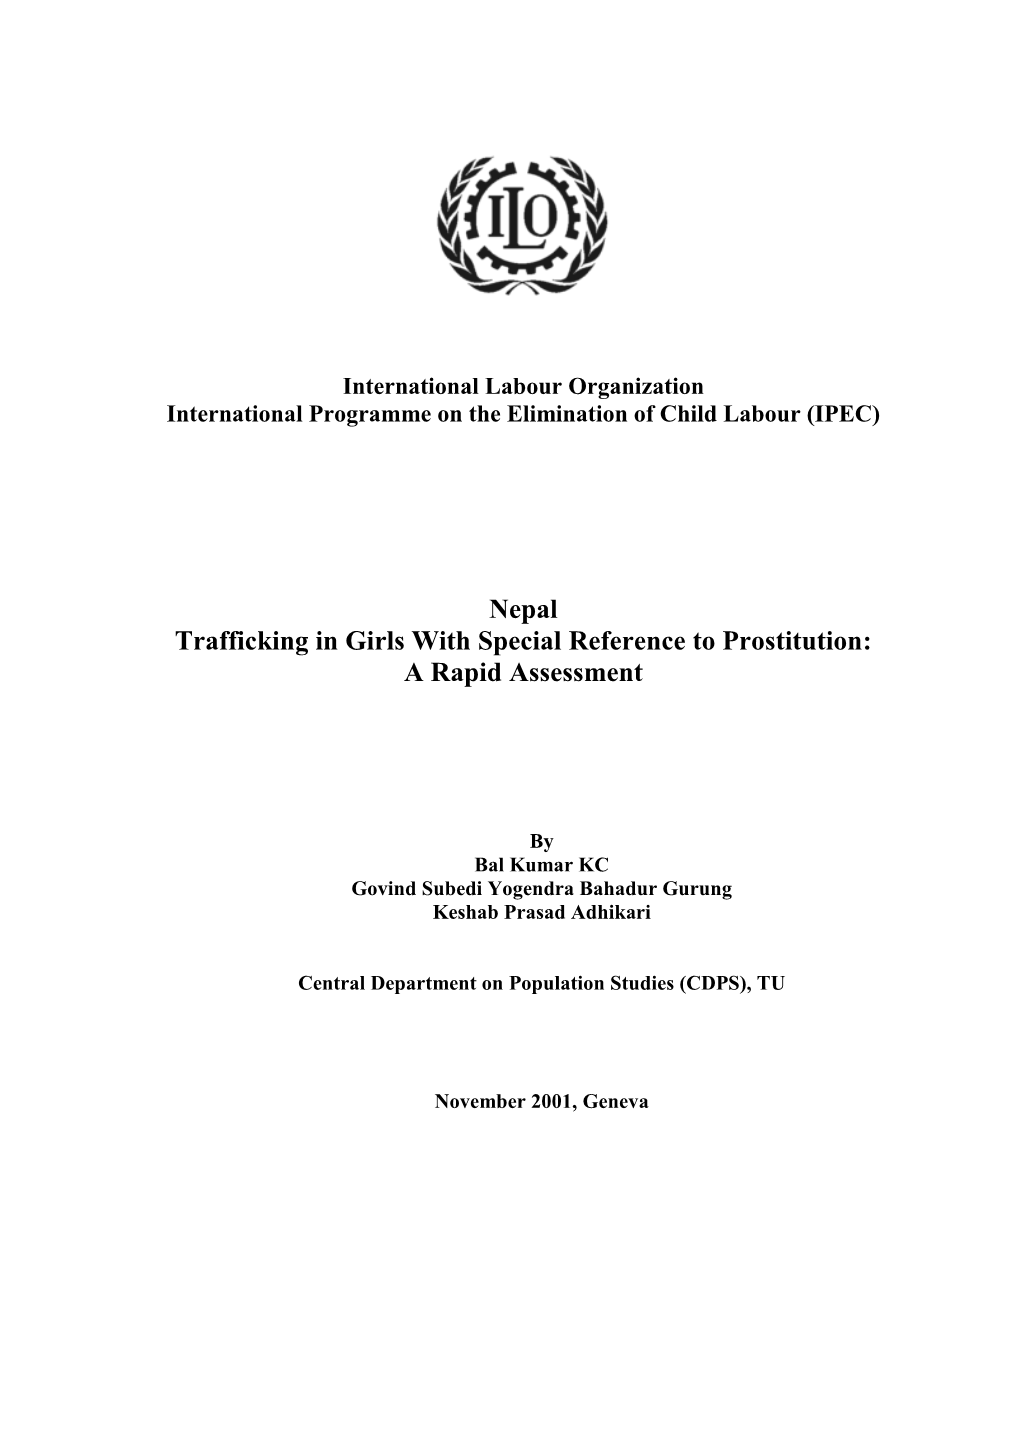 Nepal Trafficking in Girls with Special Reference to Prostitution: a Rapid Assessment